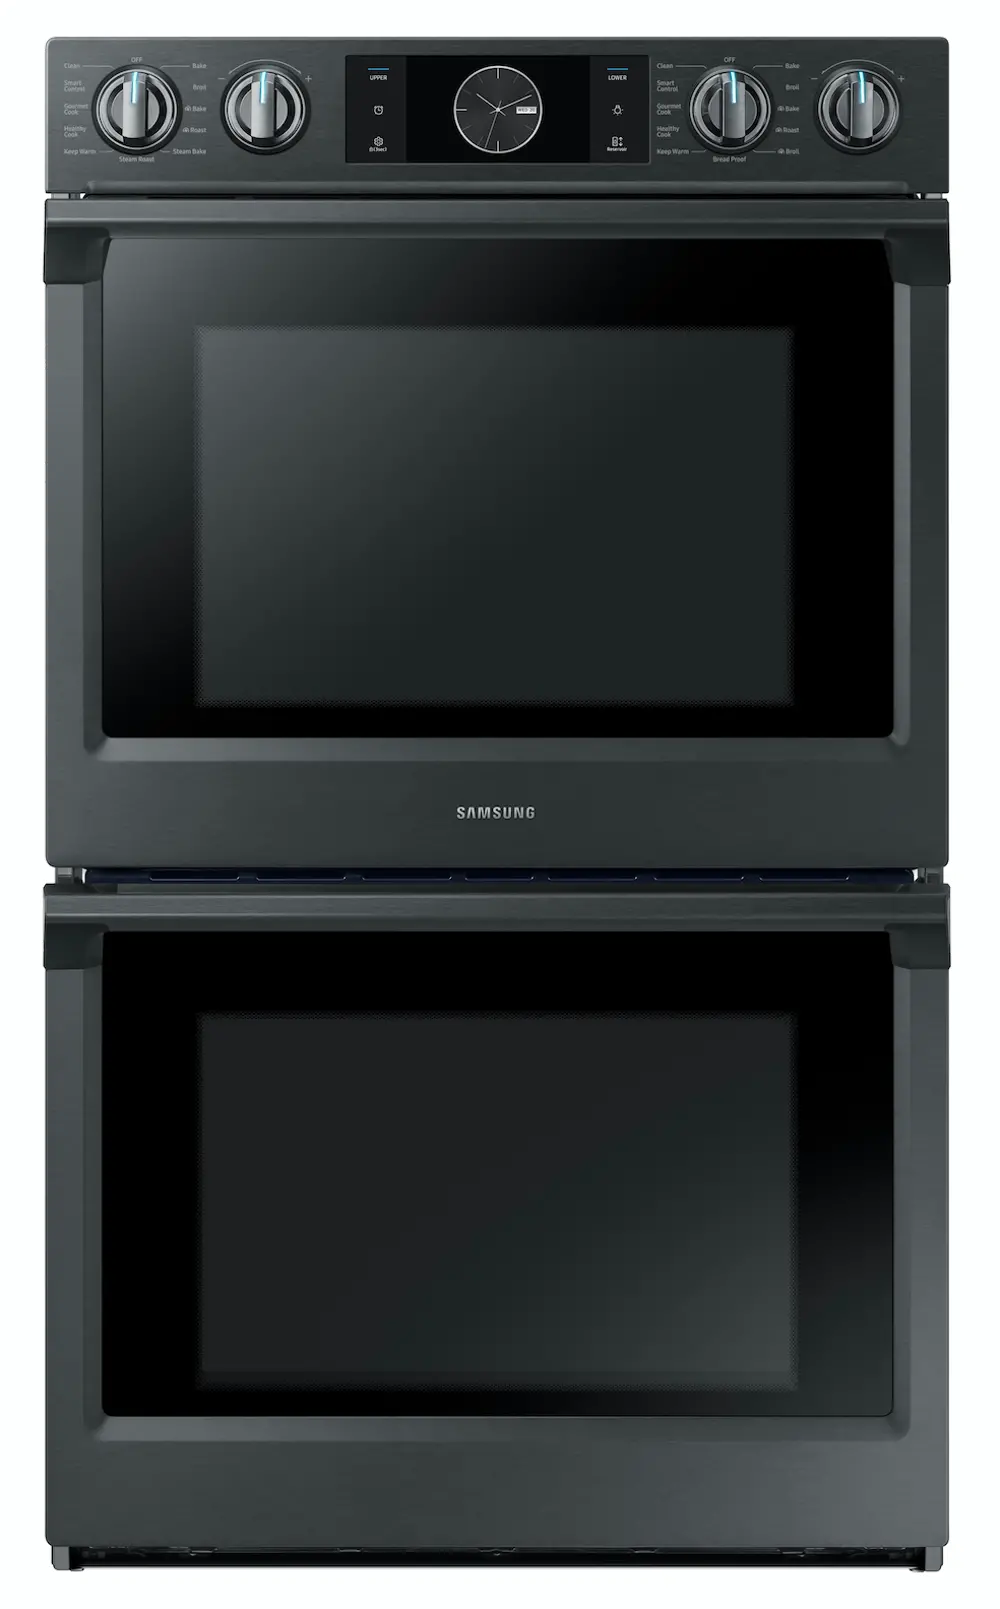 NV51K7770DG Samsung 10.2 cu ft Double Wall Oven - Black Stainless Steel 30 Inch-1